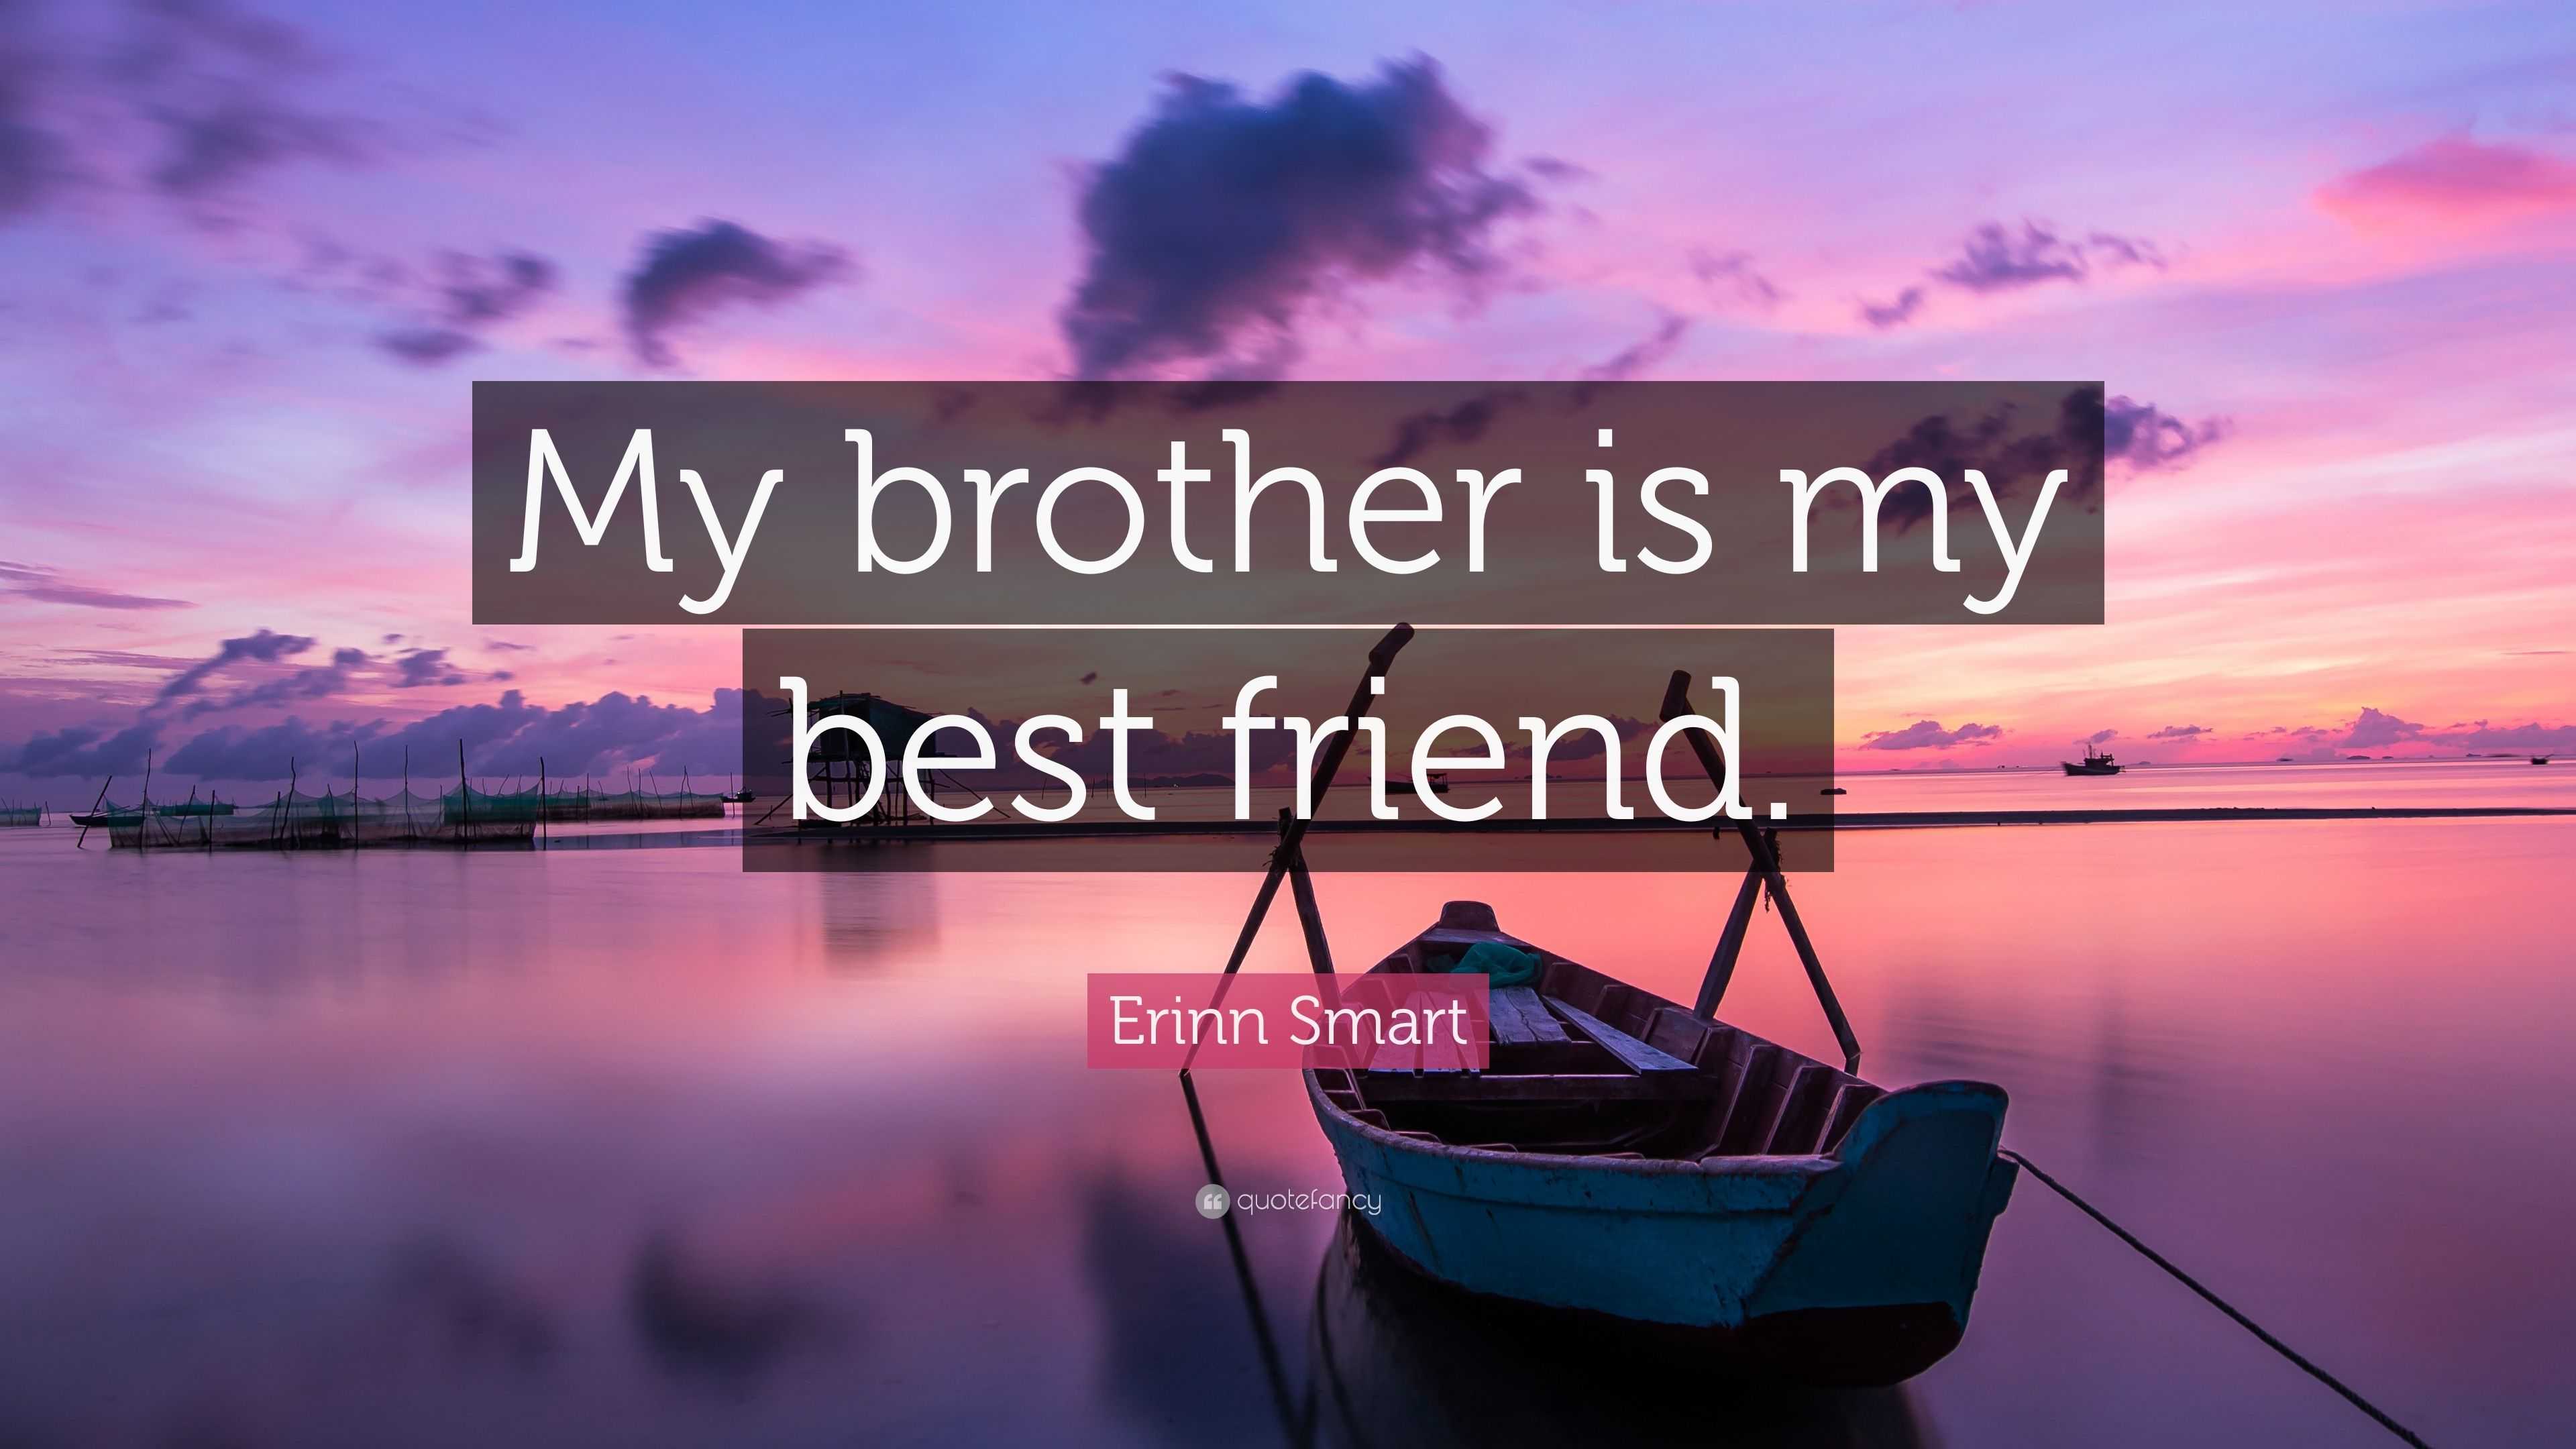 dating my best friends younger brother